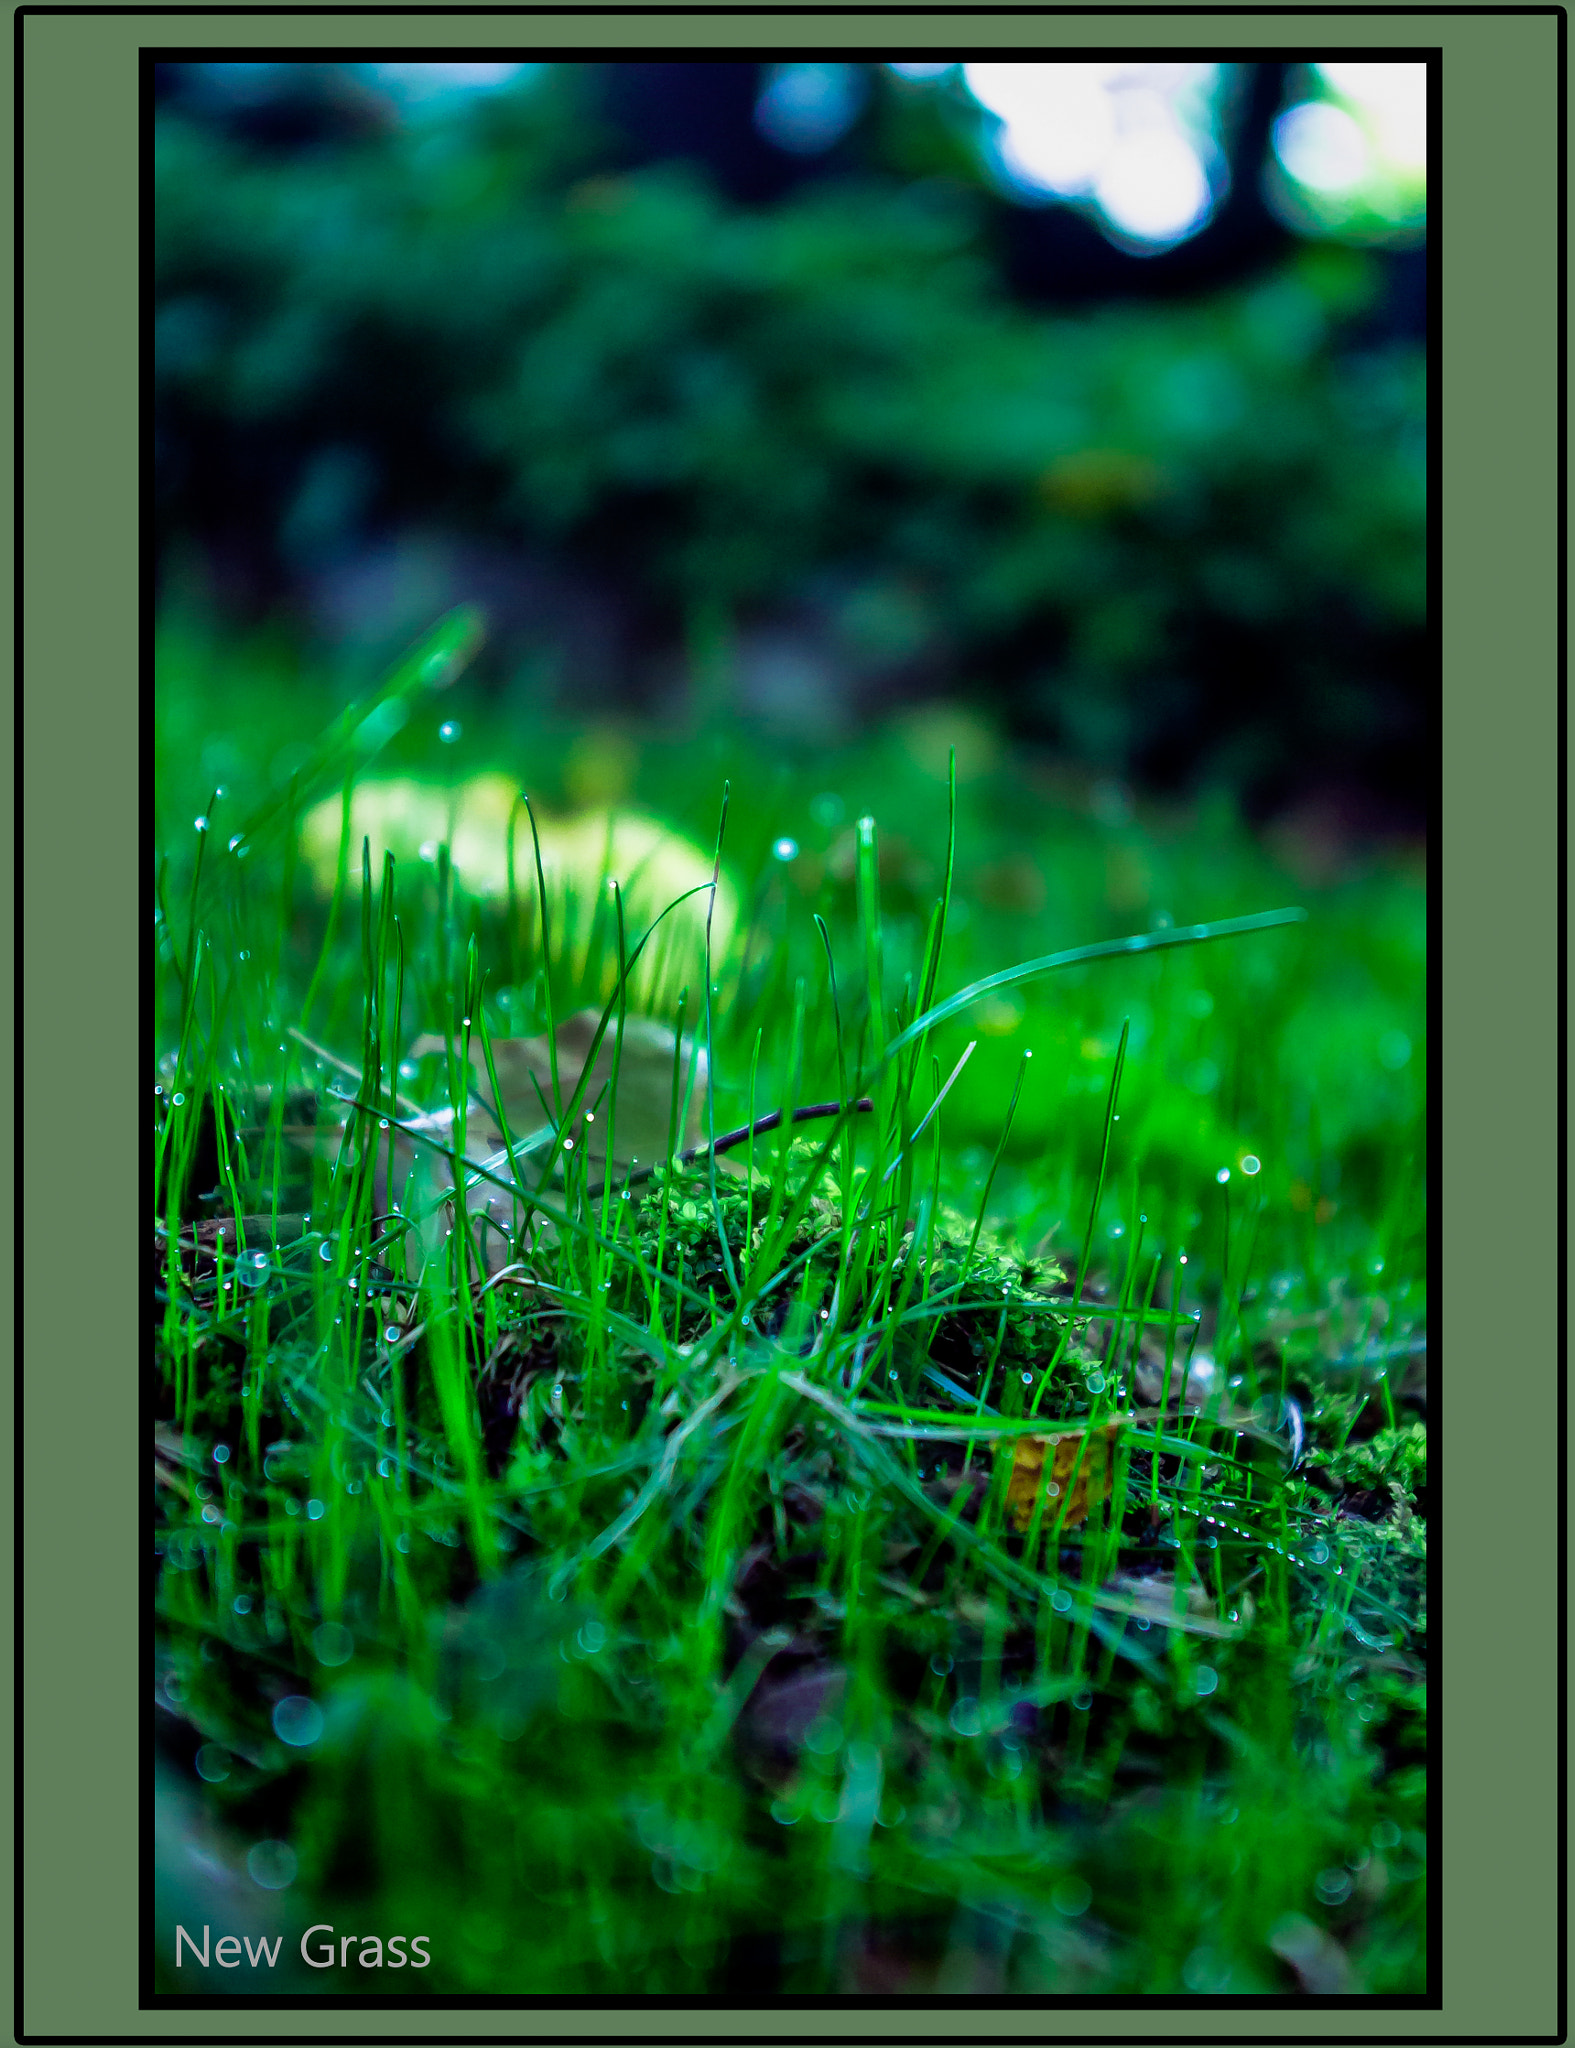 Pentax K-x sample photo. New grass coming up in the backyard photography